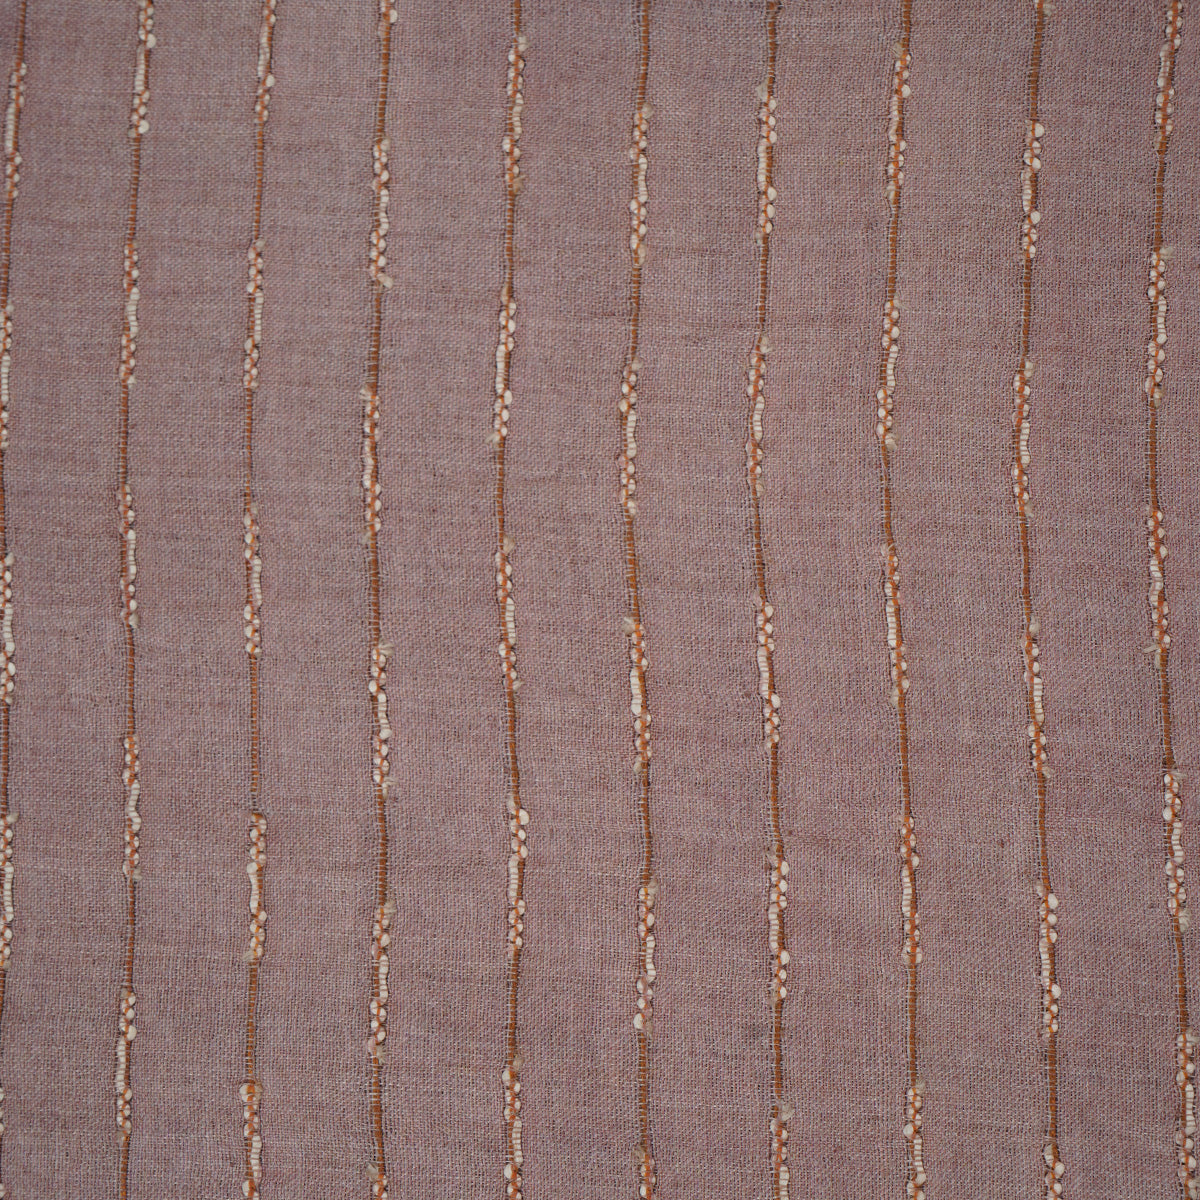 Brown Tussar Silk Fabric with Thread Lines Design